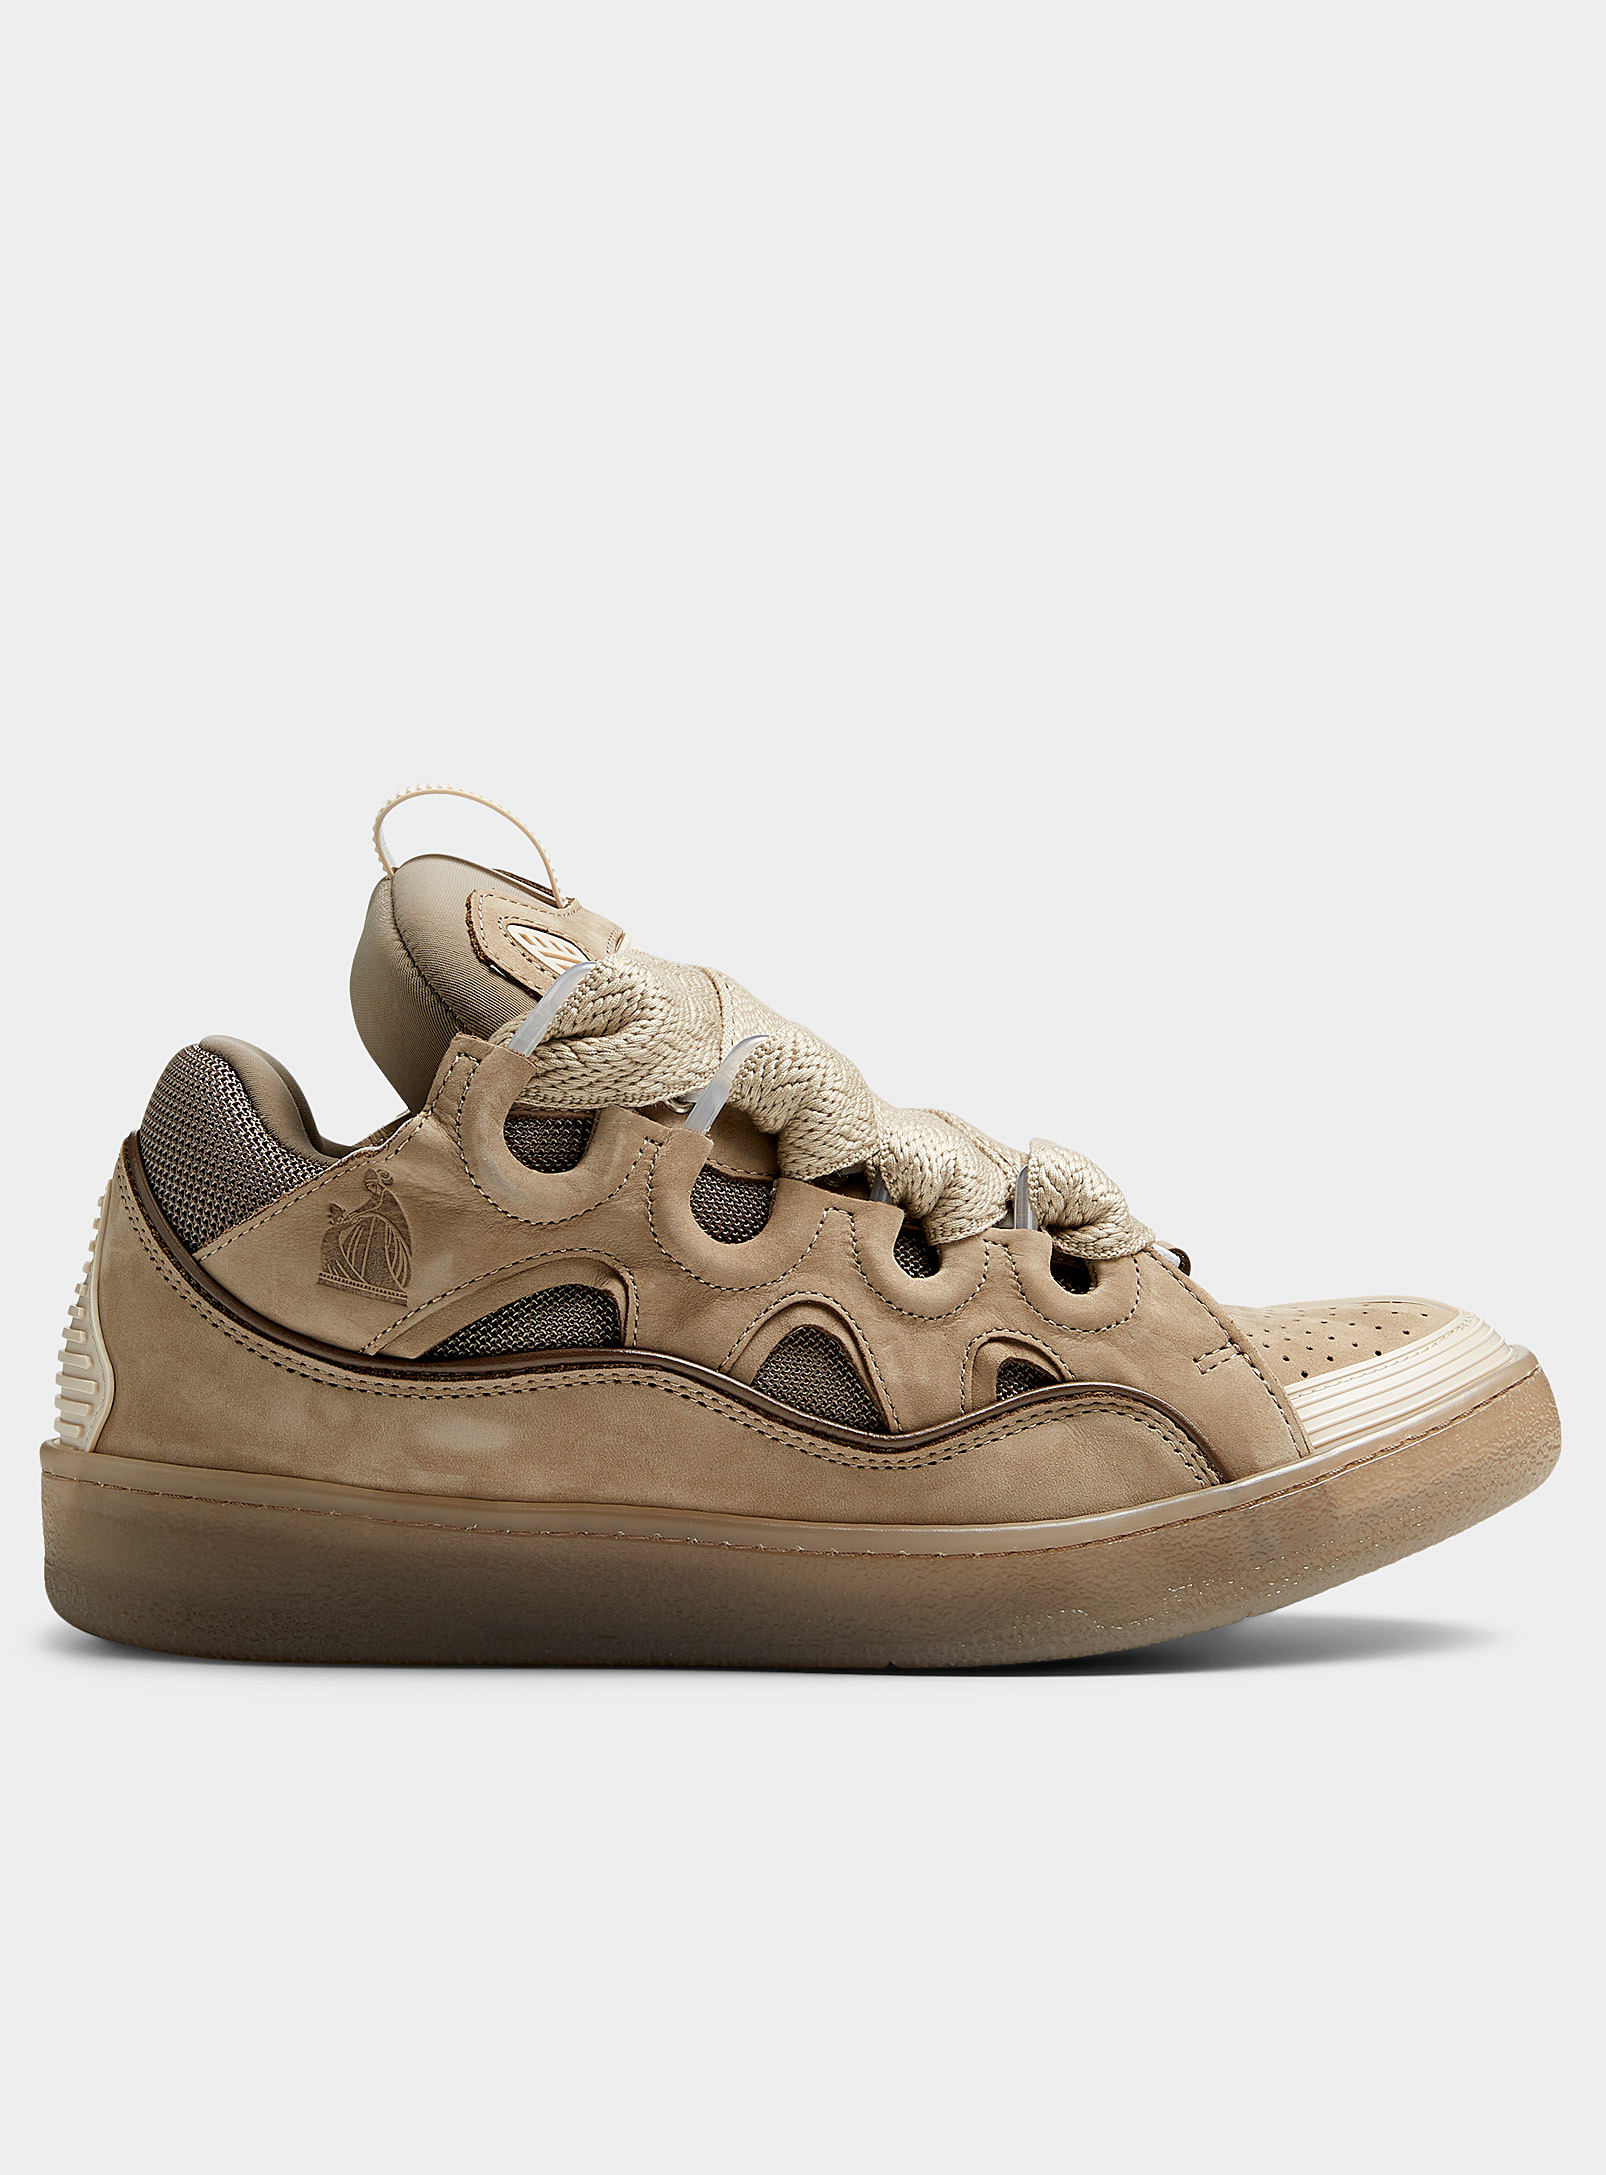 Lanvin Curb Leather Sneakers In Beige